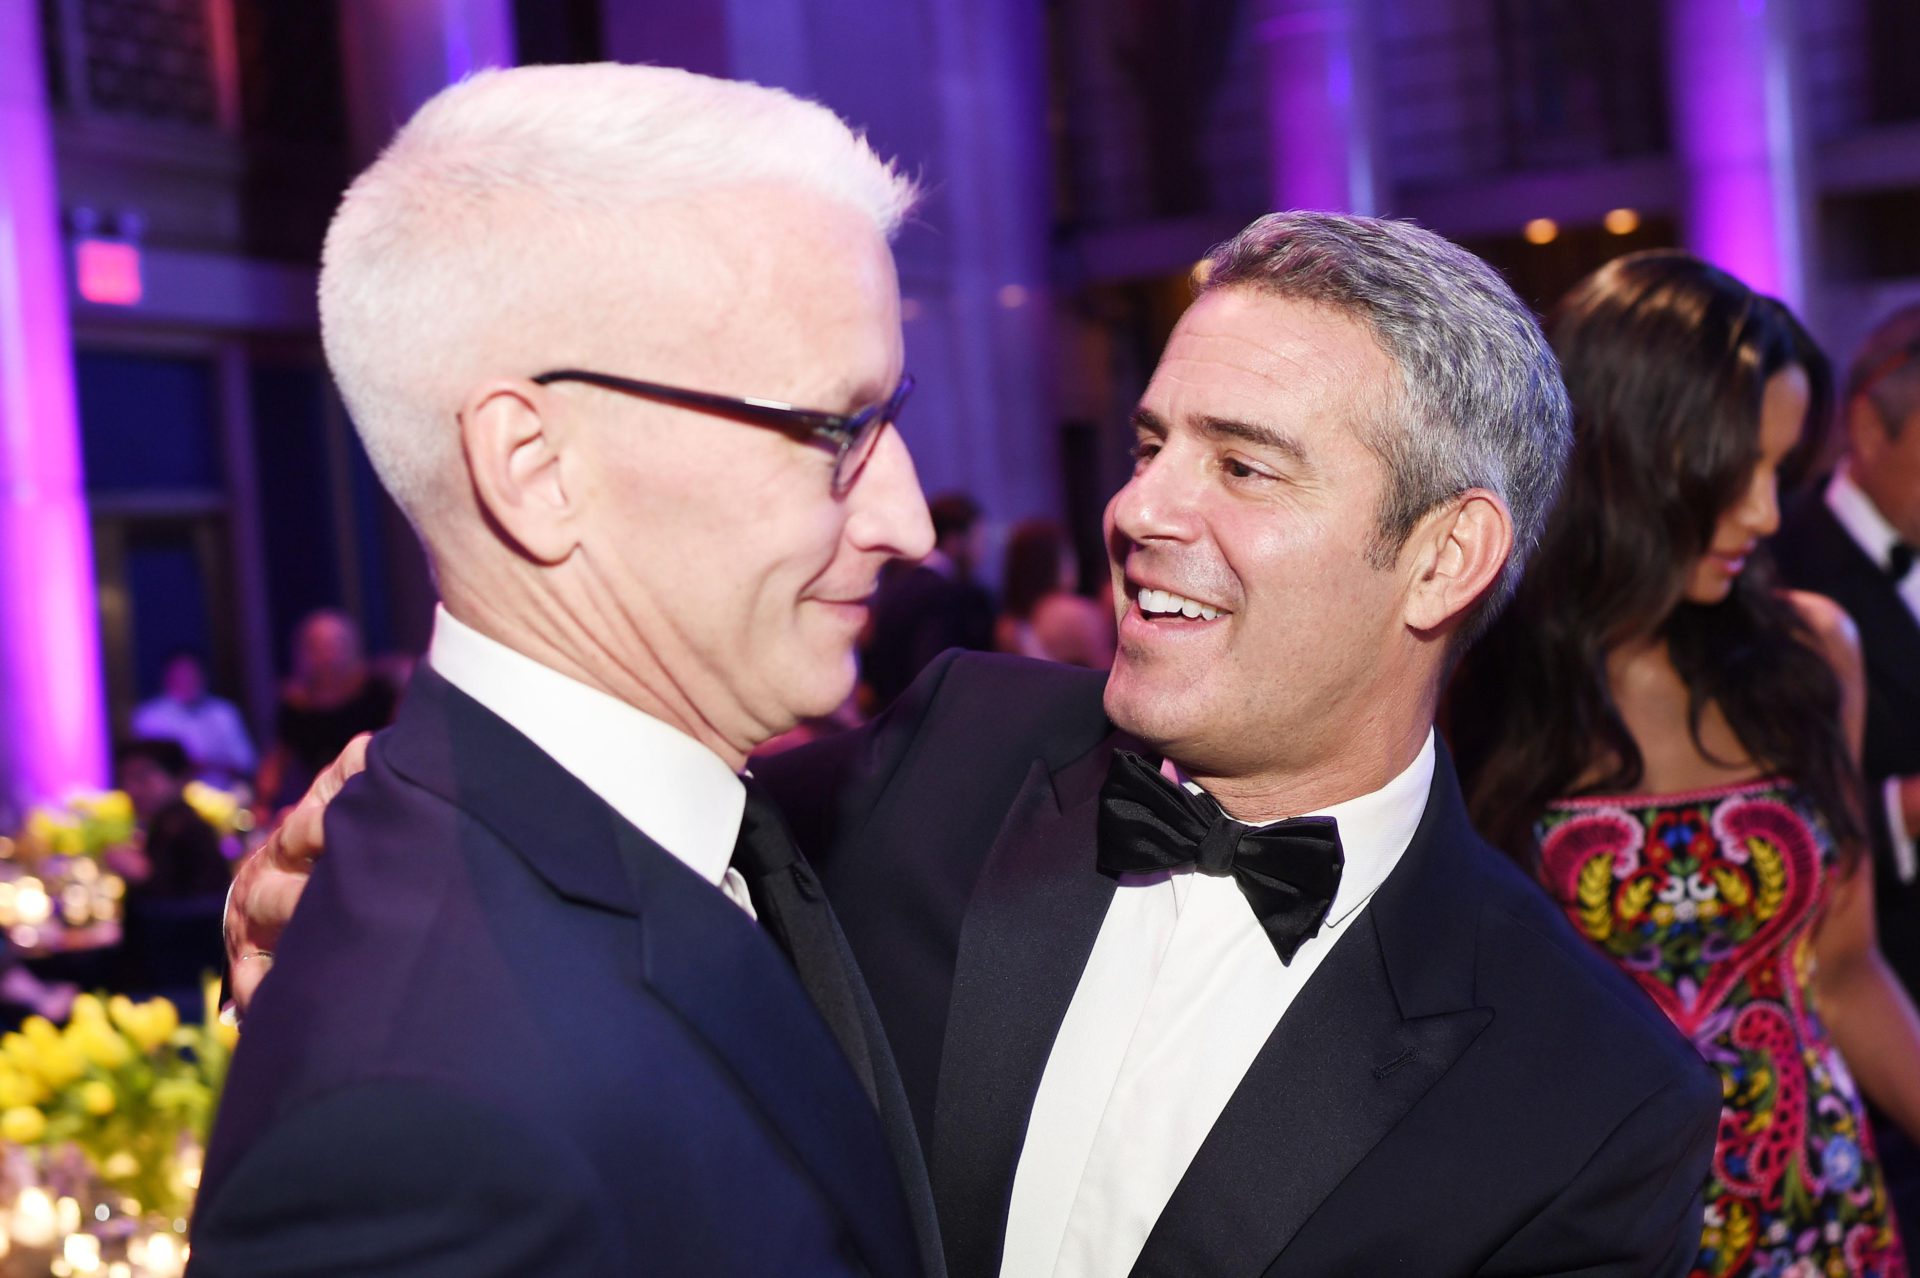 Who is Anderson Cooper dating? Friends are hoping it to be oldfriend